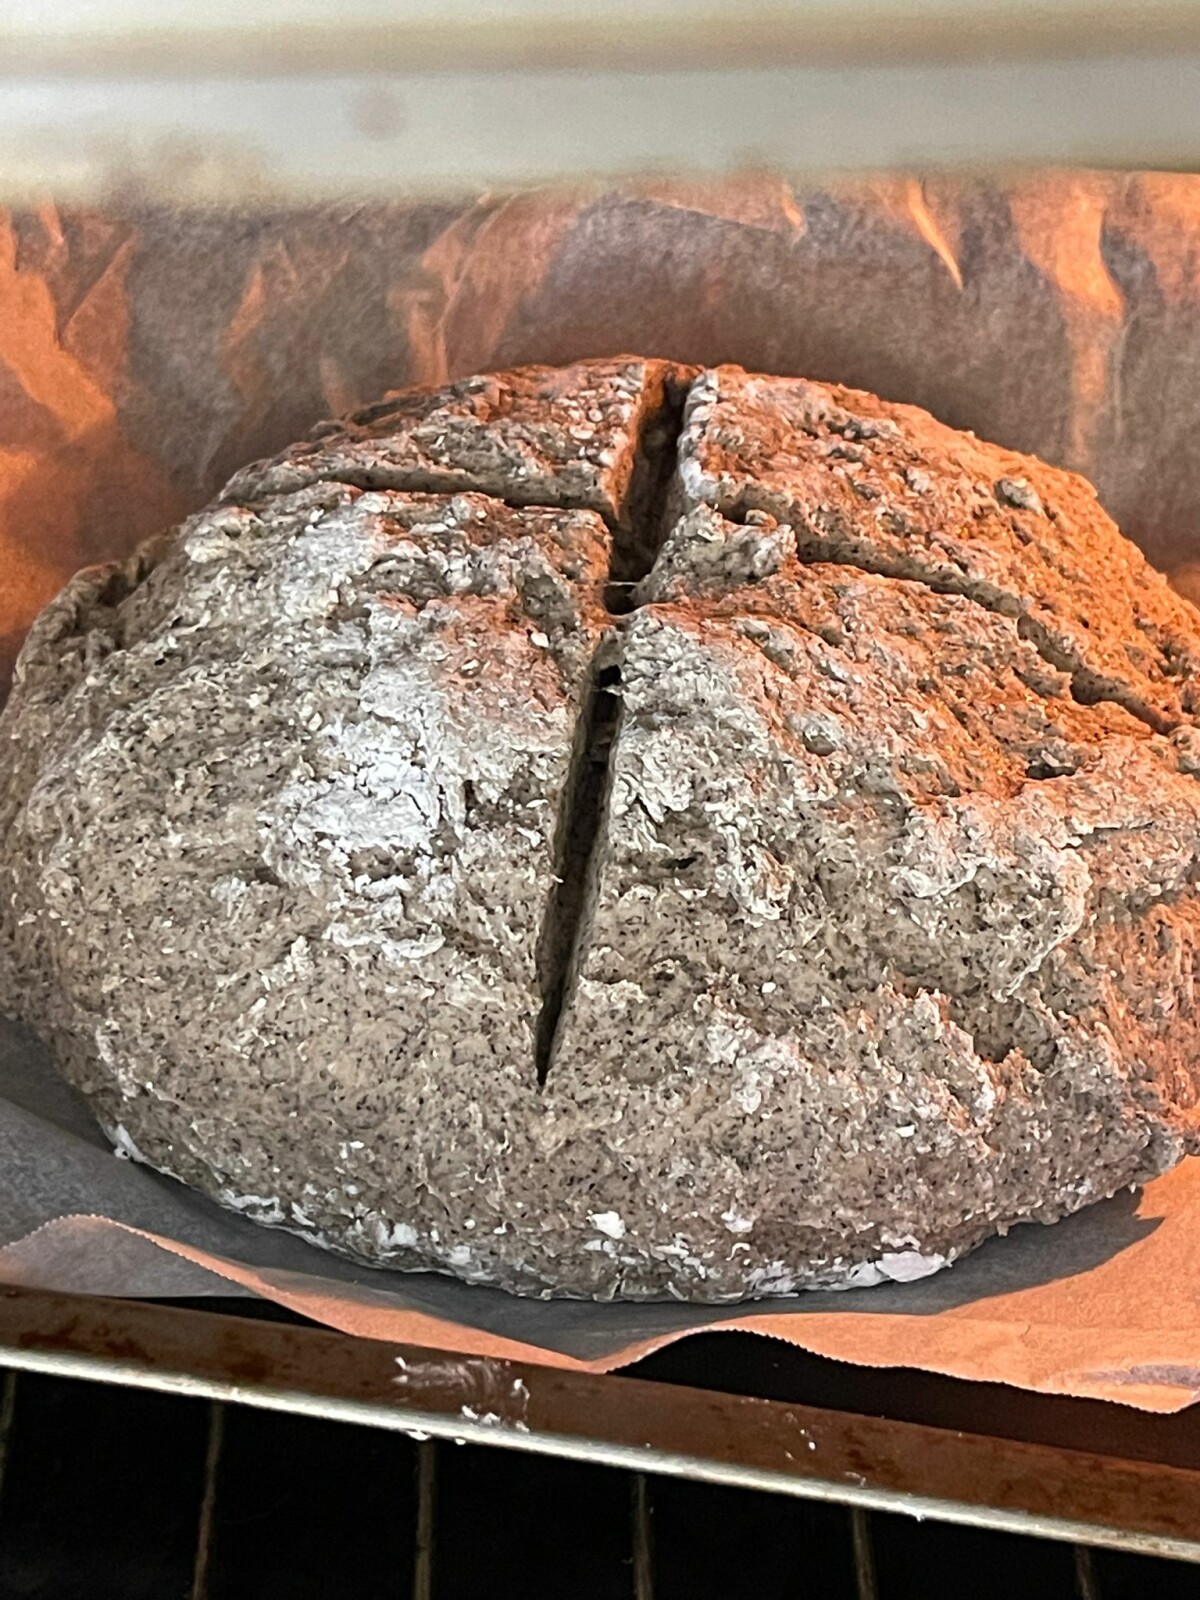 Discovering gluten-free bread became my new passion!